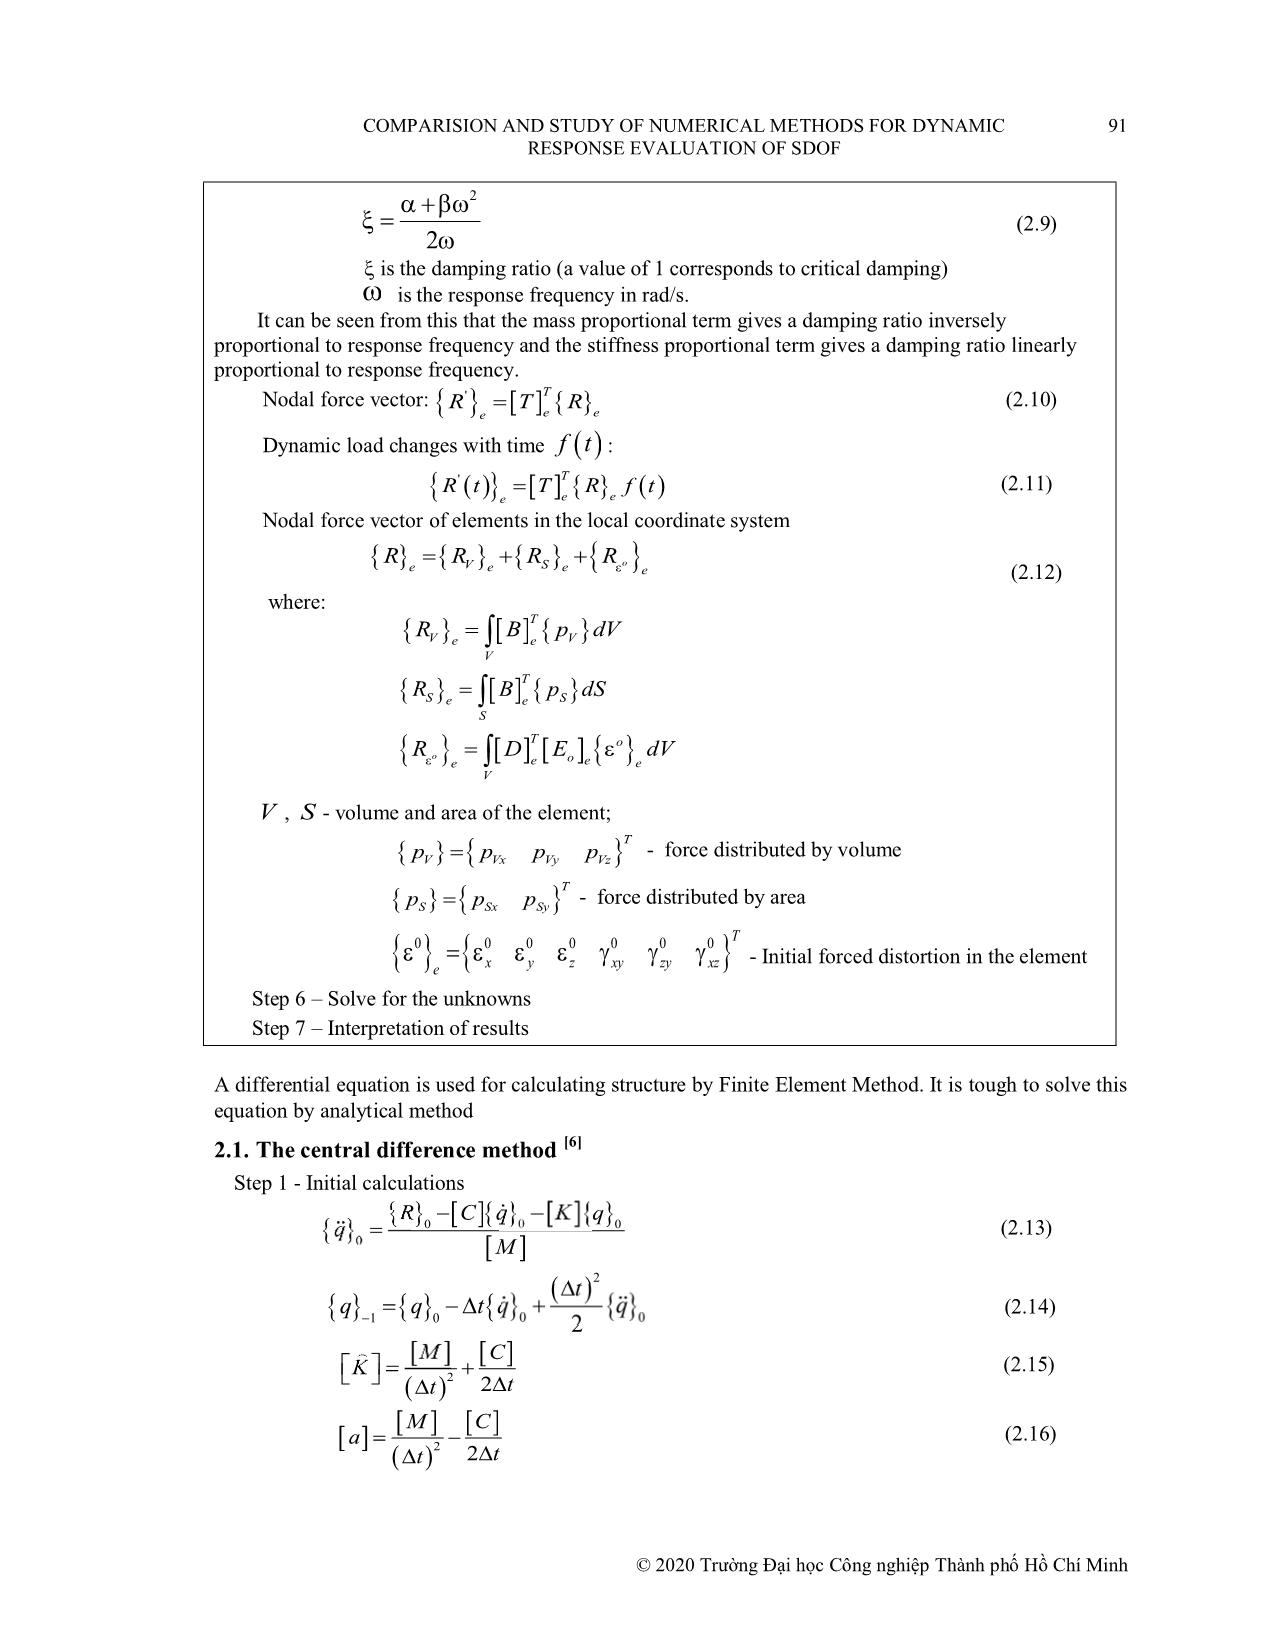 Comparision and study of numerical methods for dynamic response evaluation of sdof trang 4